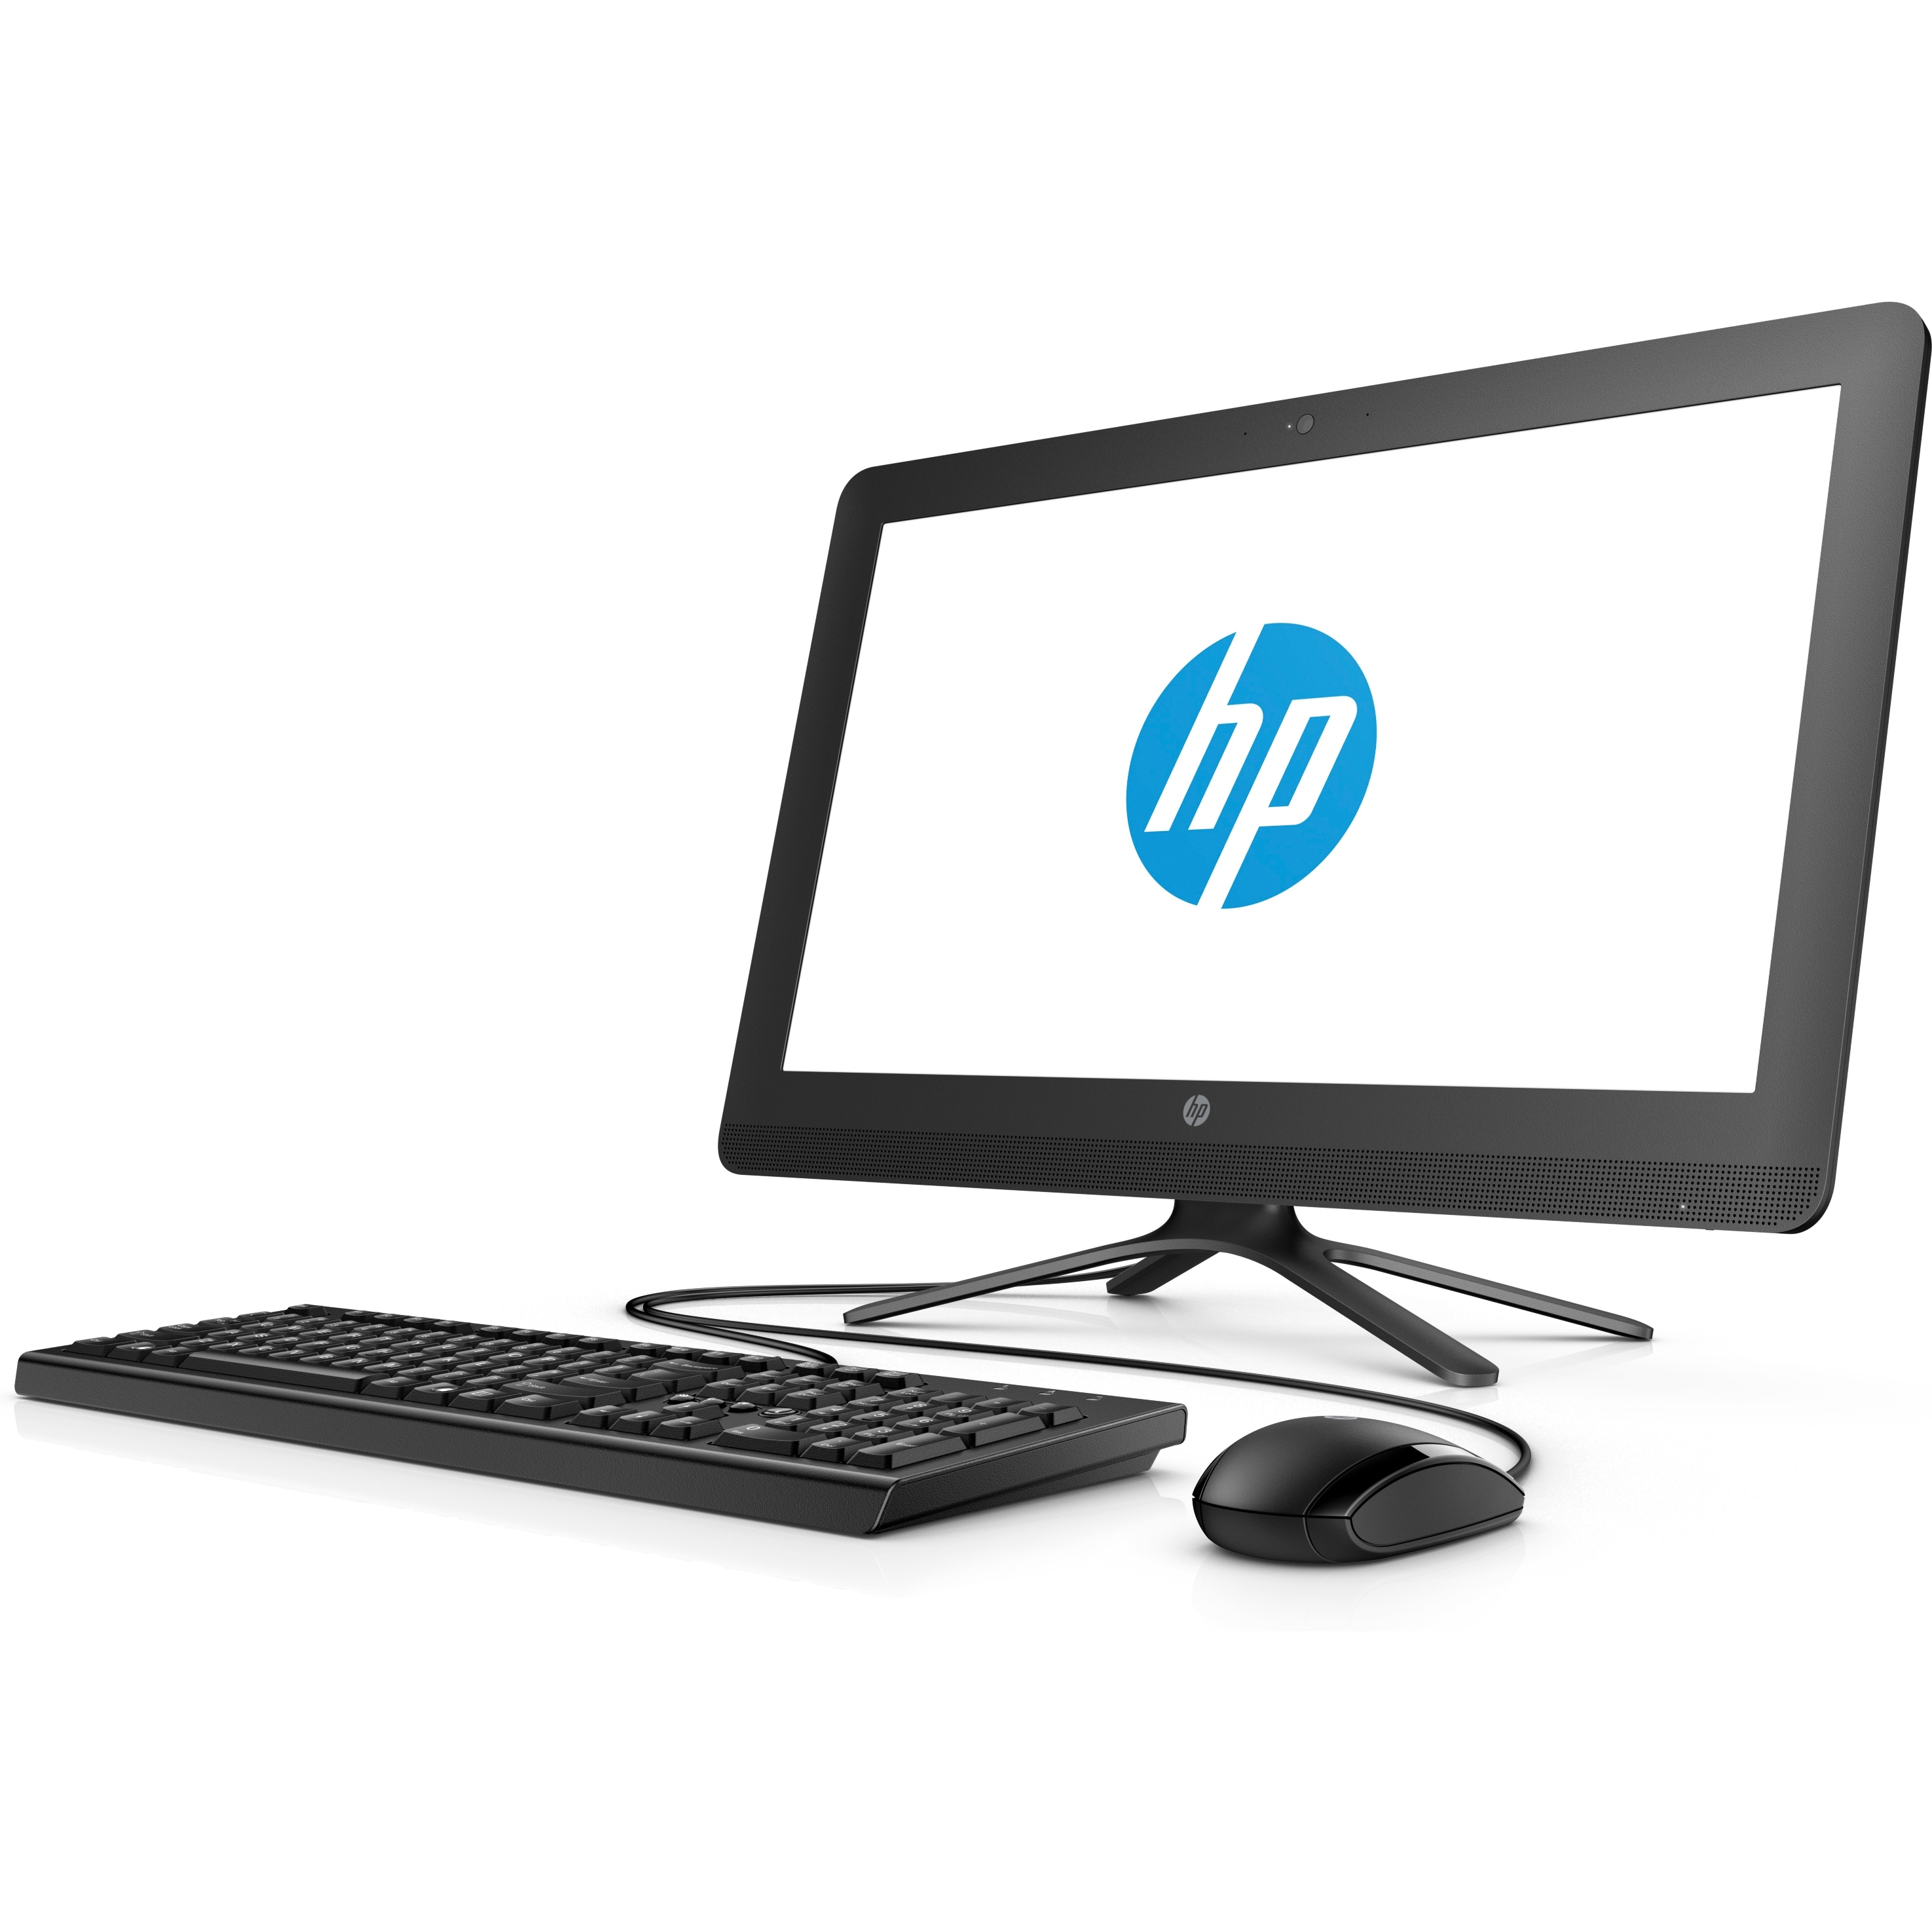 HP 22-C0005NT 4GS17EA i7-8700T 4GB 256SSD O/B VGA 21.5" FHD NONTOUCH FREDOOS ALL IN ONE PC